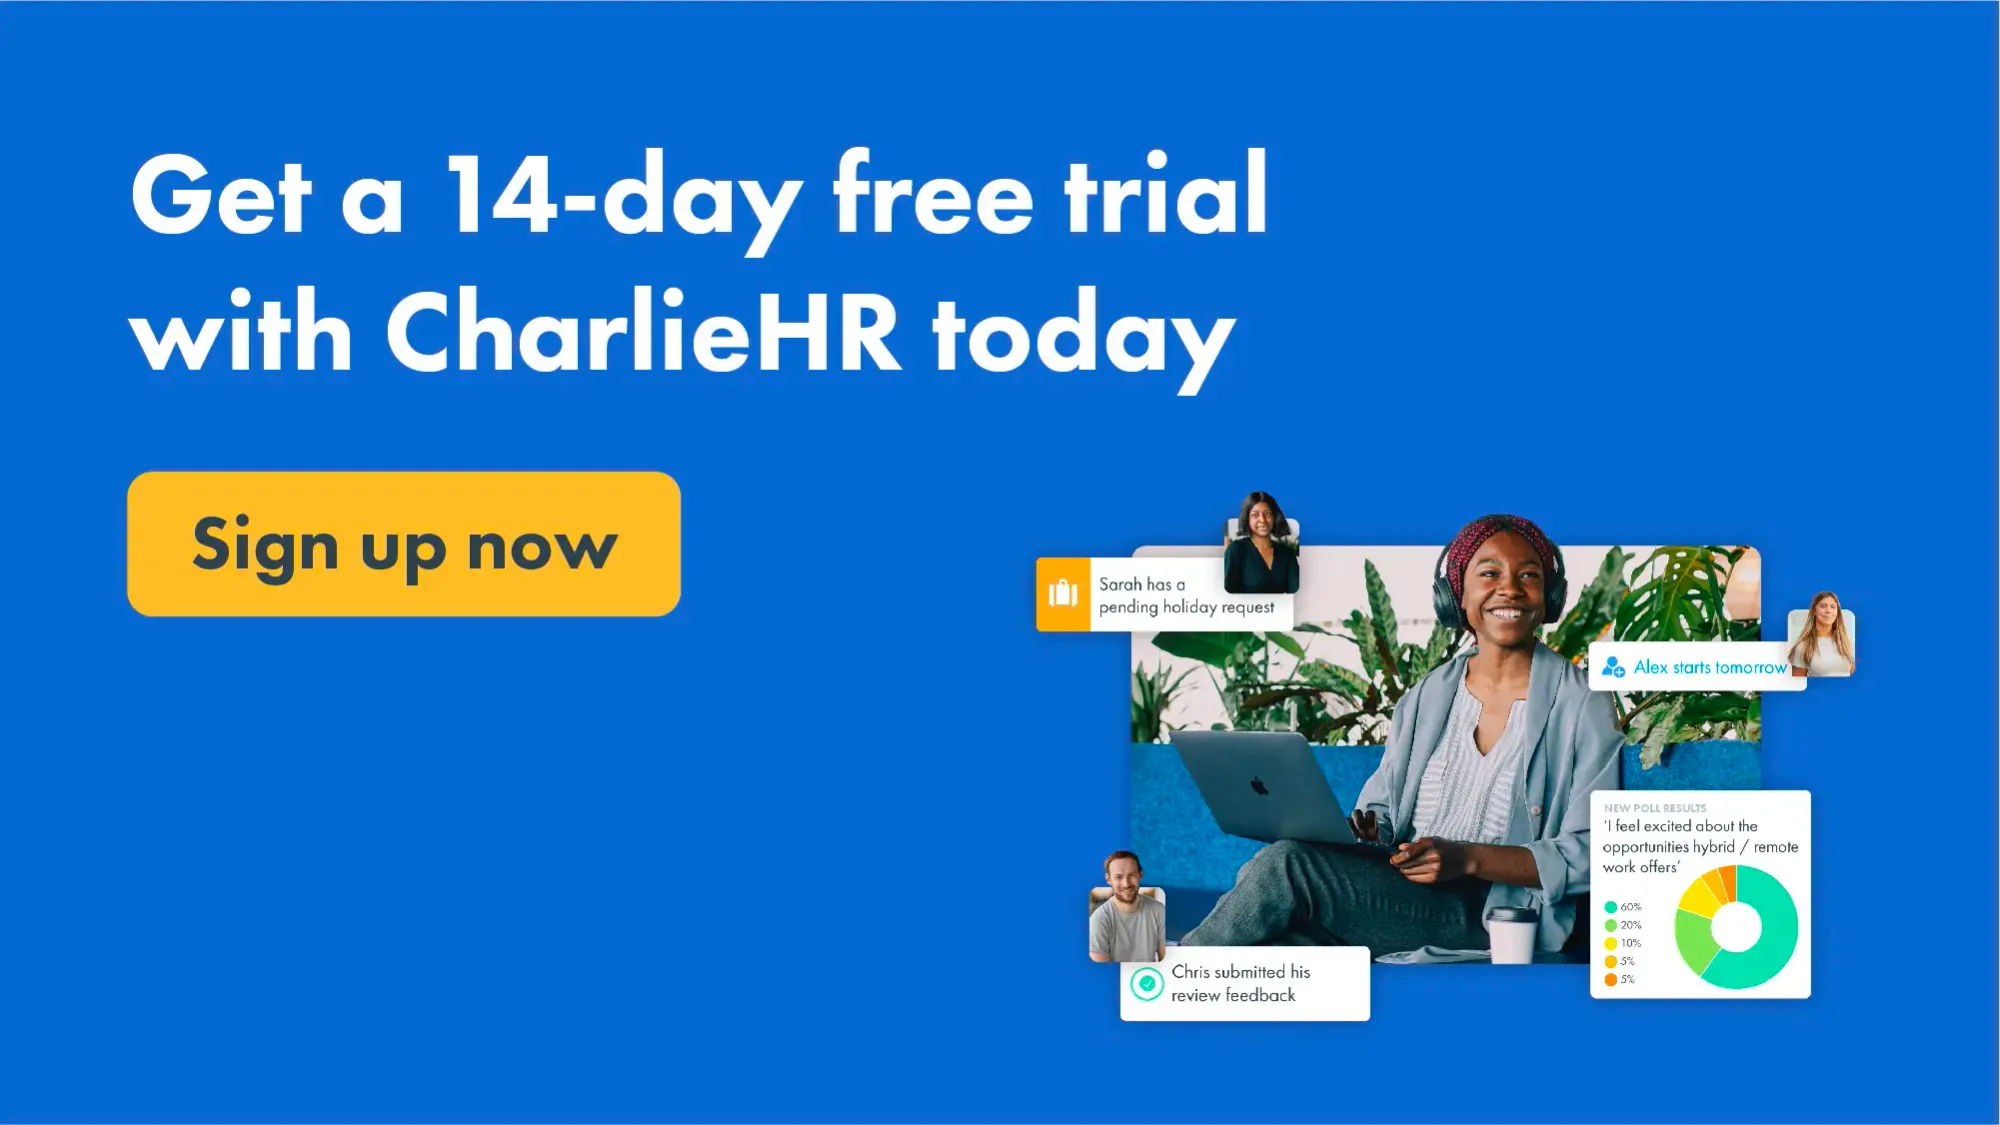 Get a 14 day free trial with CharlieHR and do your remote onboarding